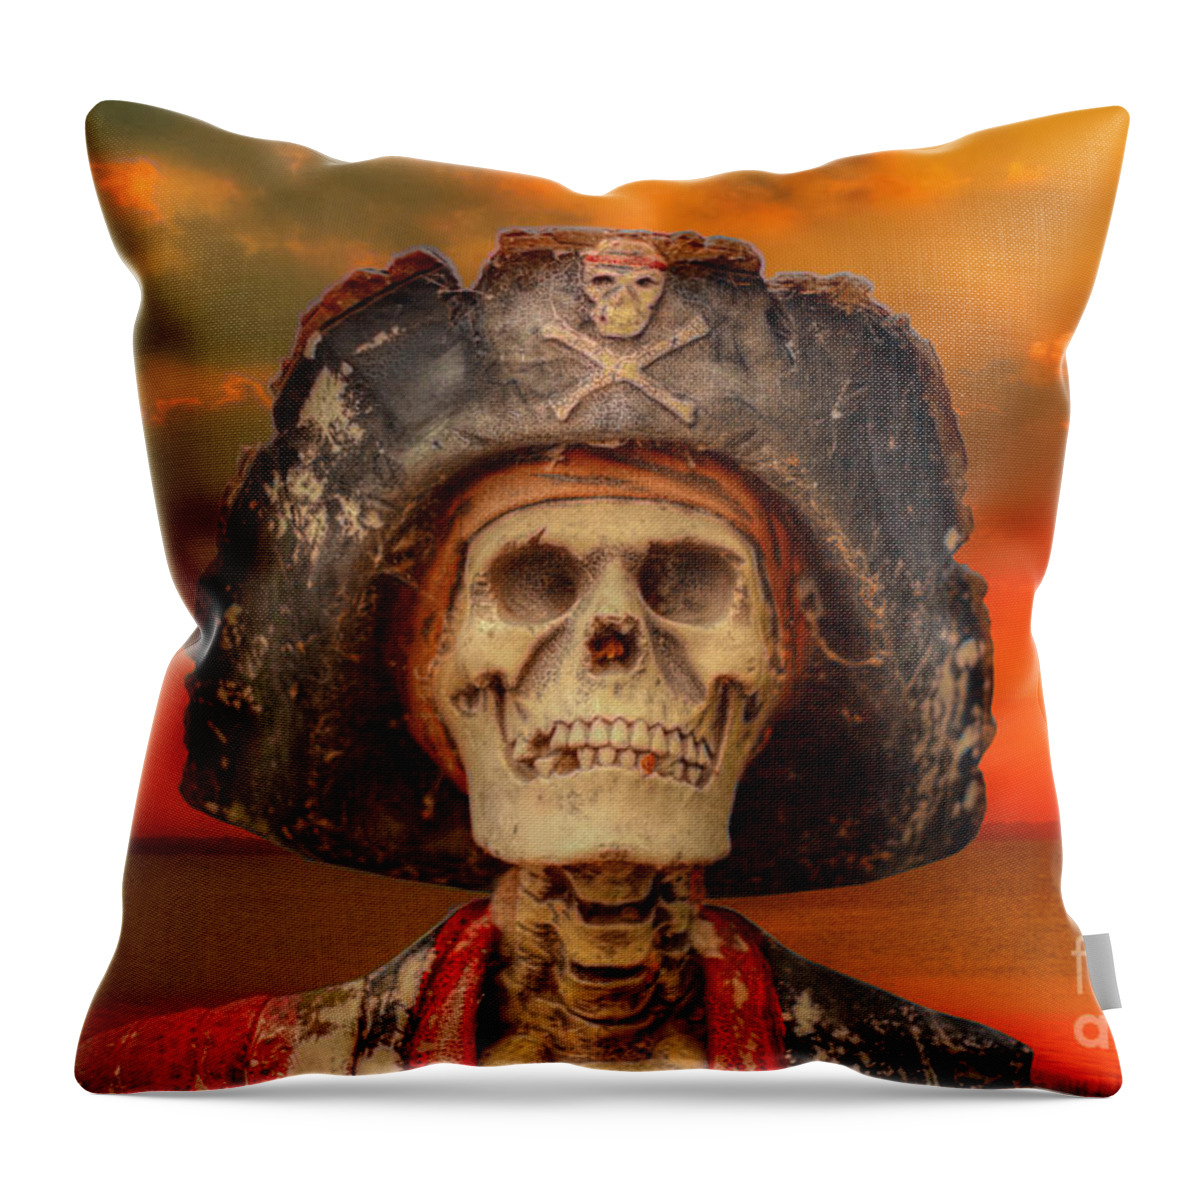 Pirate Throw Pillow featuring the digital art Pirate Skeleton Sunset by Randy Steele